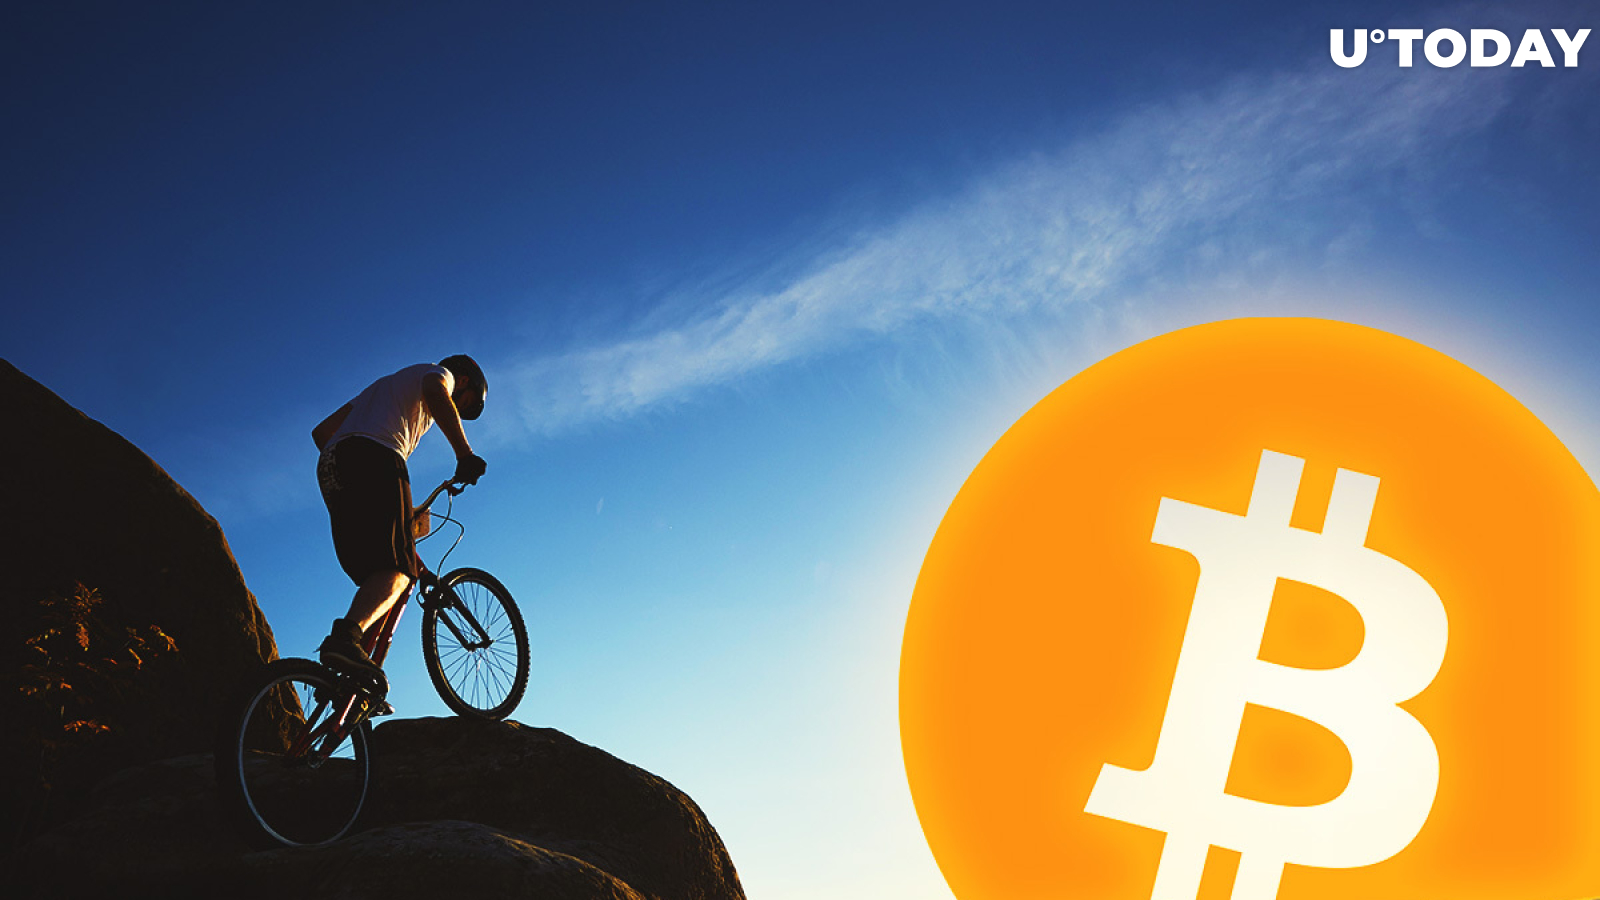 Bitcoin Passes Stress Test, No Better Time for BTC: Macro Trader